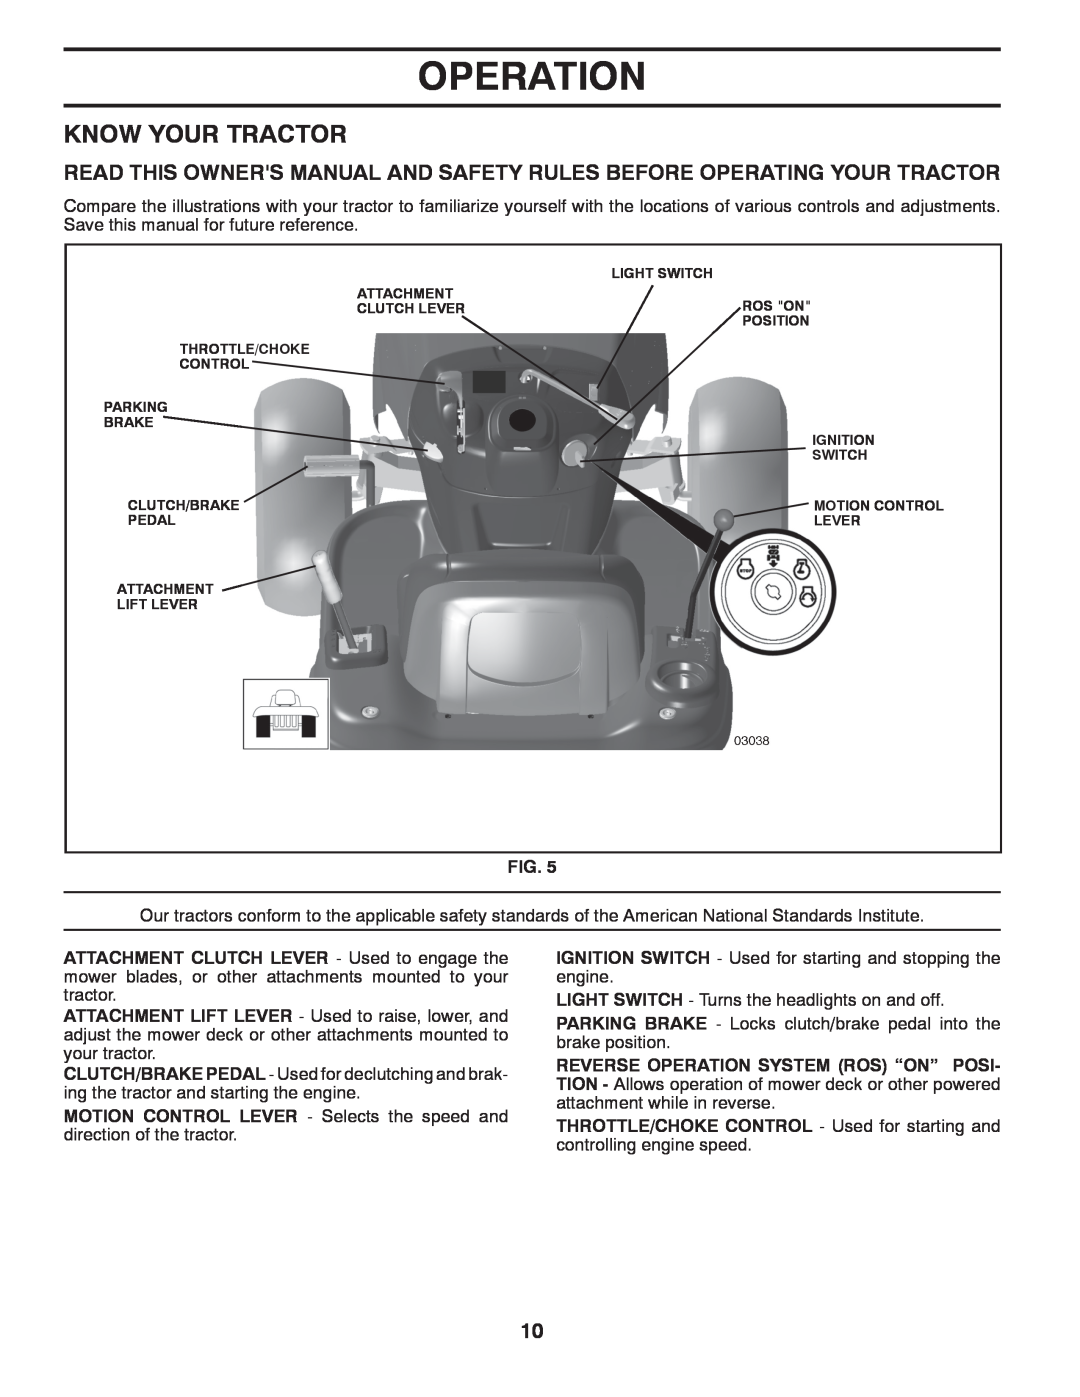 Poulan PB20H42LT manual Know Your Tractor, Operation 